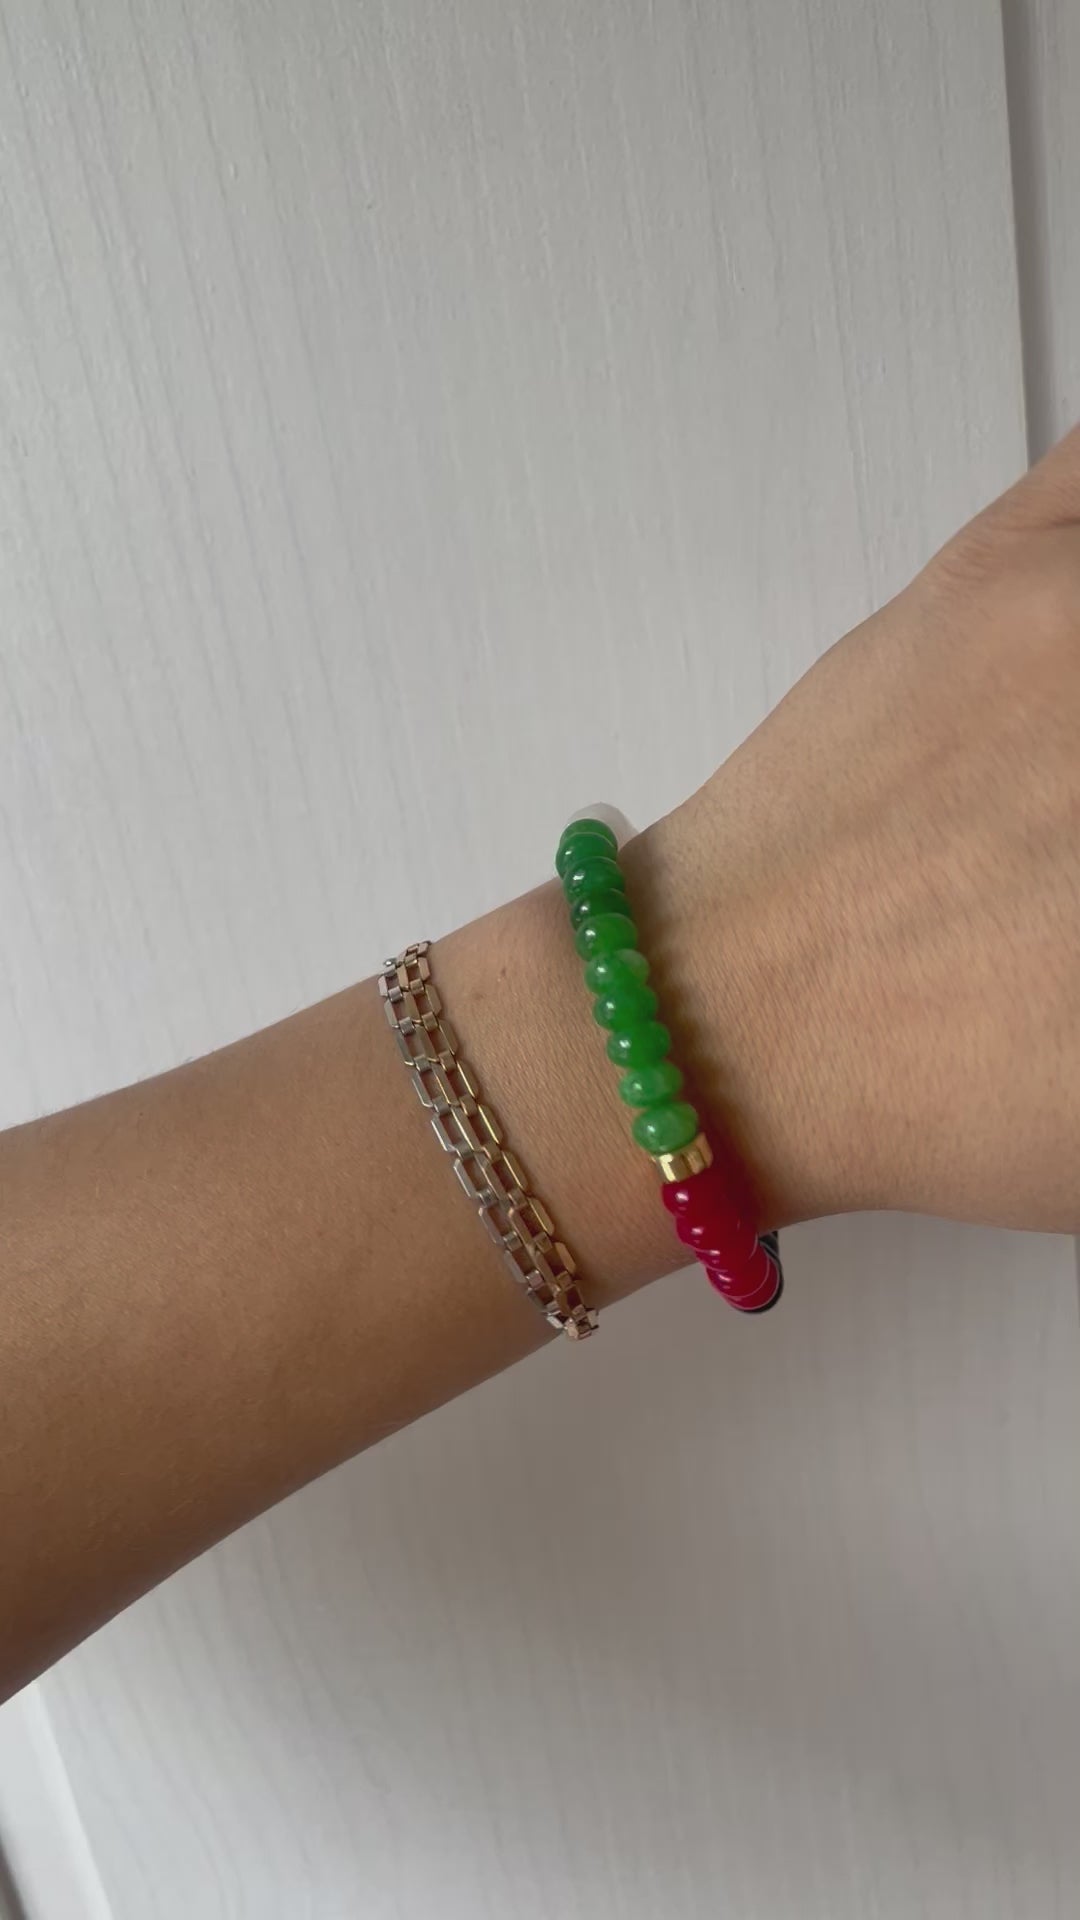 video shows a beaded bracelet with the colors of the Palestinian Flag and a gold accent bead.